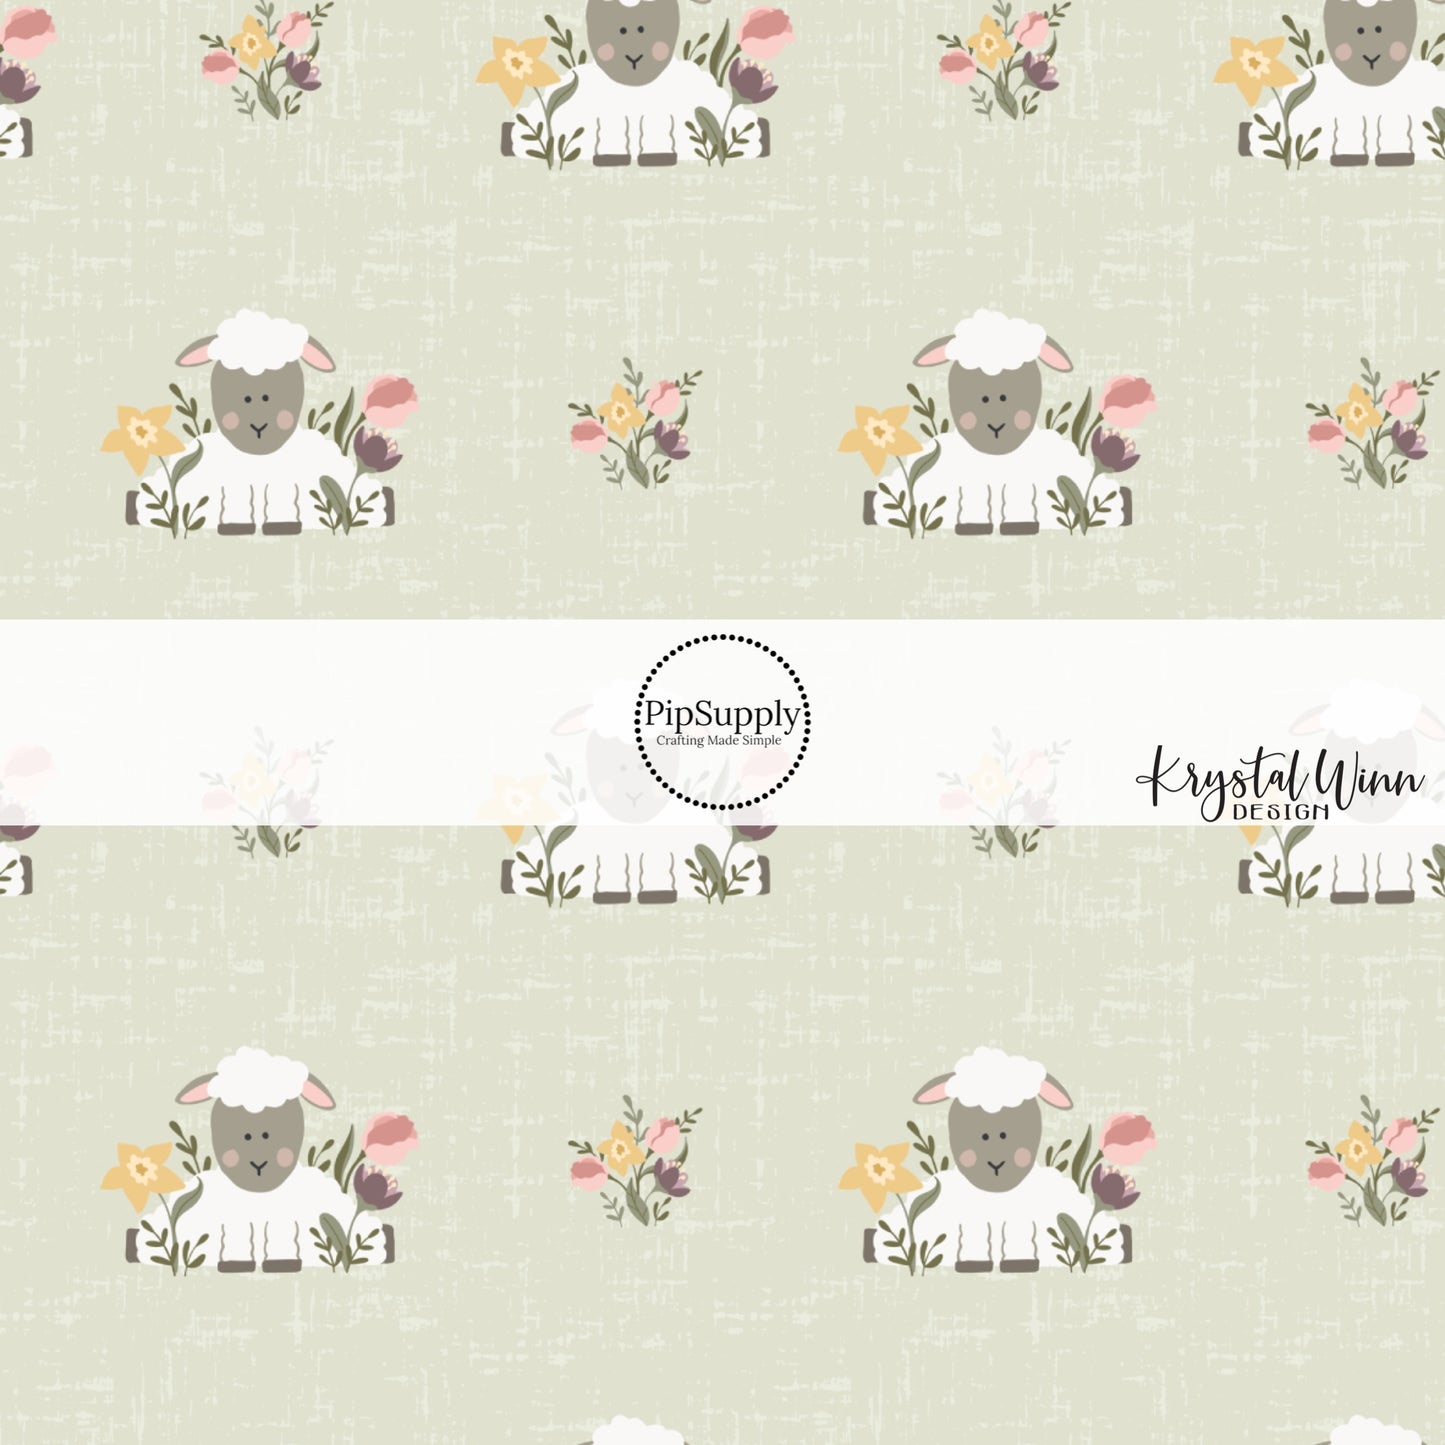 Yellow, pink, and purple flowers with white sheep with a gray face and blushing cheeks on a green distressed bow strip